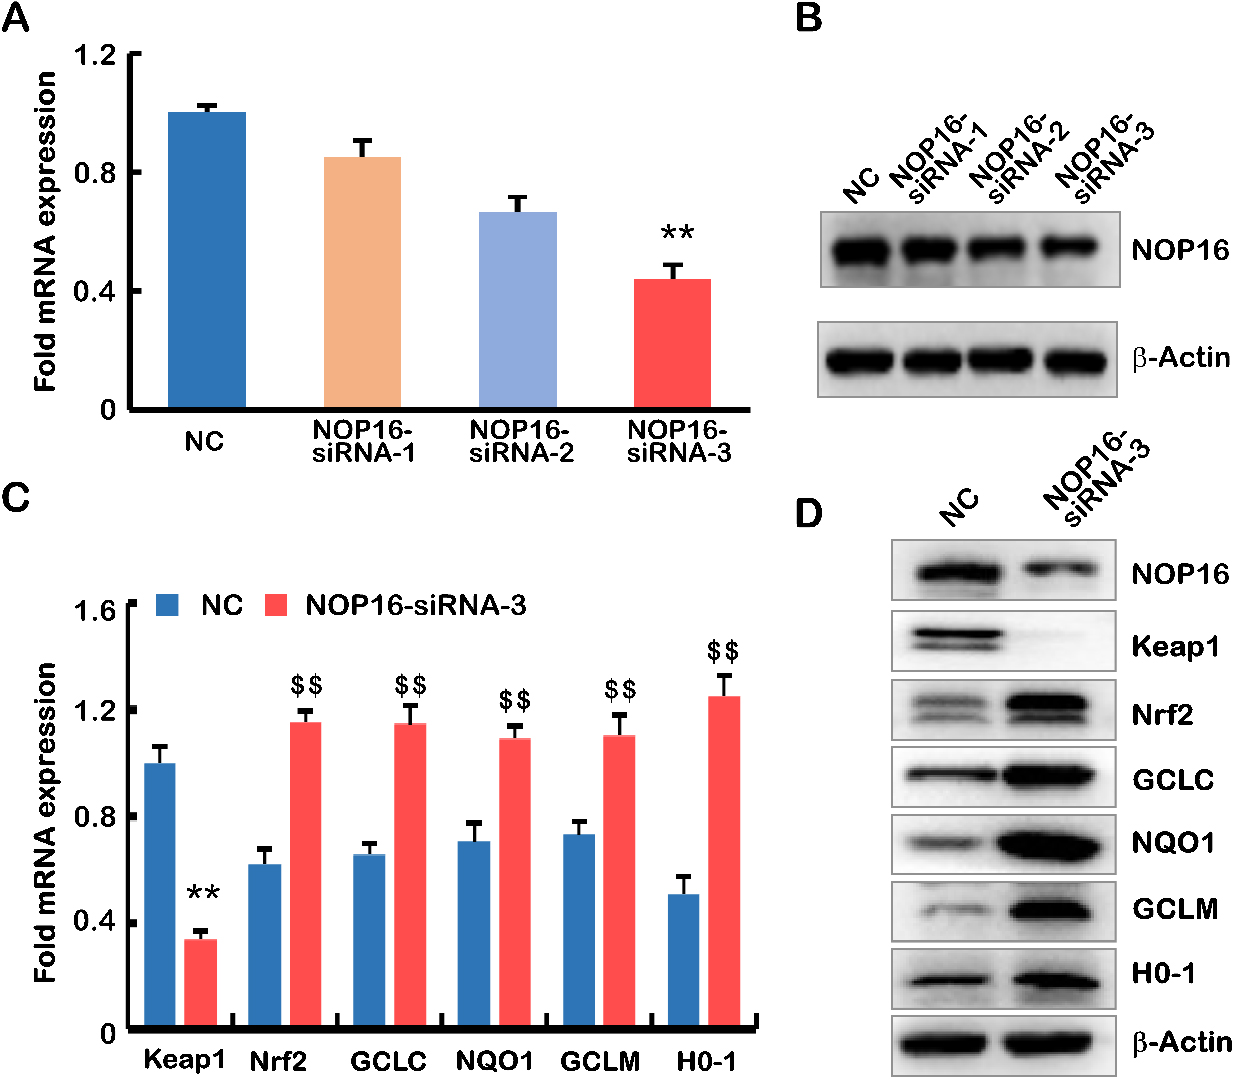 The decrease in NOP16 leads to abnormal expression of the Keap1-Nrf2 signalling pathway. (A–B) siRNA interfered with the expression of NOP16 in HepG2 cells, and mRNA and protein levels were measured using q-PCR (A) and WB, respectively (B). (C–D) siRNA3 interfered with the expression of NOP16 and affected the Keap1-Nrf2 pathway. q-PCR (C) and WB (D) were used to detect its expression. The full name of the protein involved in Fig D is as follows: Keap1 (kelch like ECH associated protein 1), Nrf2 NRF2 (Nuclear Factor erythroid 2-Related Factor 2), GCLC (Recombinant Glutamate Cysteine Ligase, Catalytic), NQO1 (NAD (P) H: quinoneoxidoreductaseNQO1), GCLM (Recombinant Glutamate Cysteine Ligase, Modifier Subunit), HO-1 (NAD (P) H: quinoneoxidoreductaseNQO1) N⩾ 3, and “**” “$⁡$” indicates p⩽ 0.01.